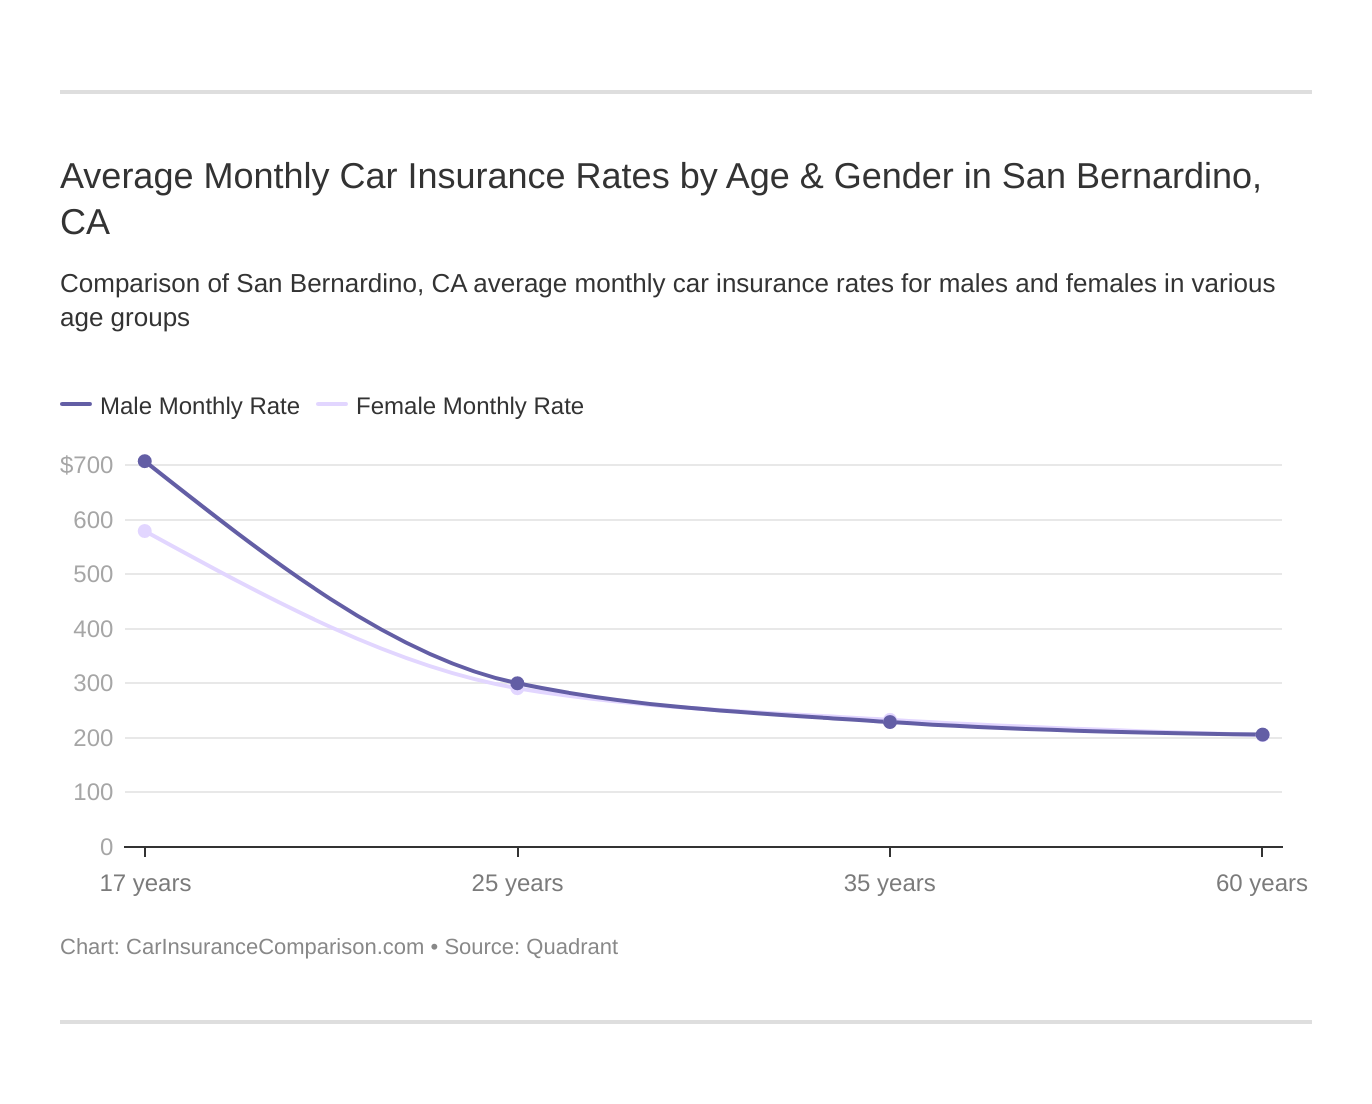 Average Monthly Car Insurance Rates by Age & Gender in San Bernardino, CA